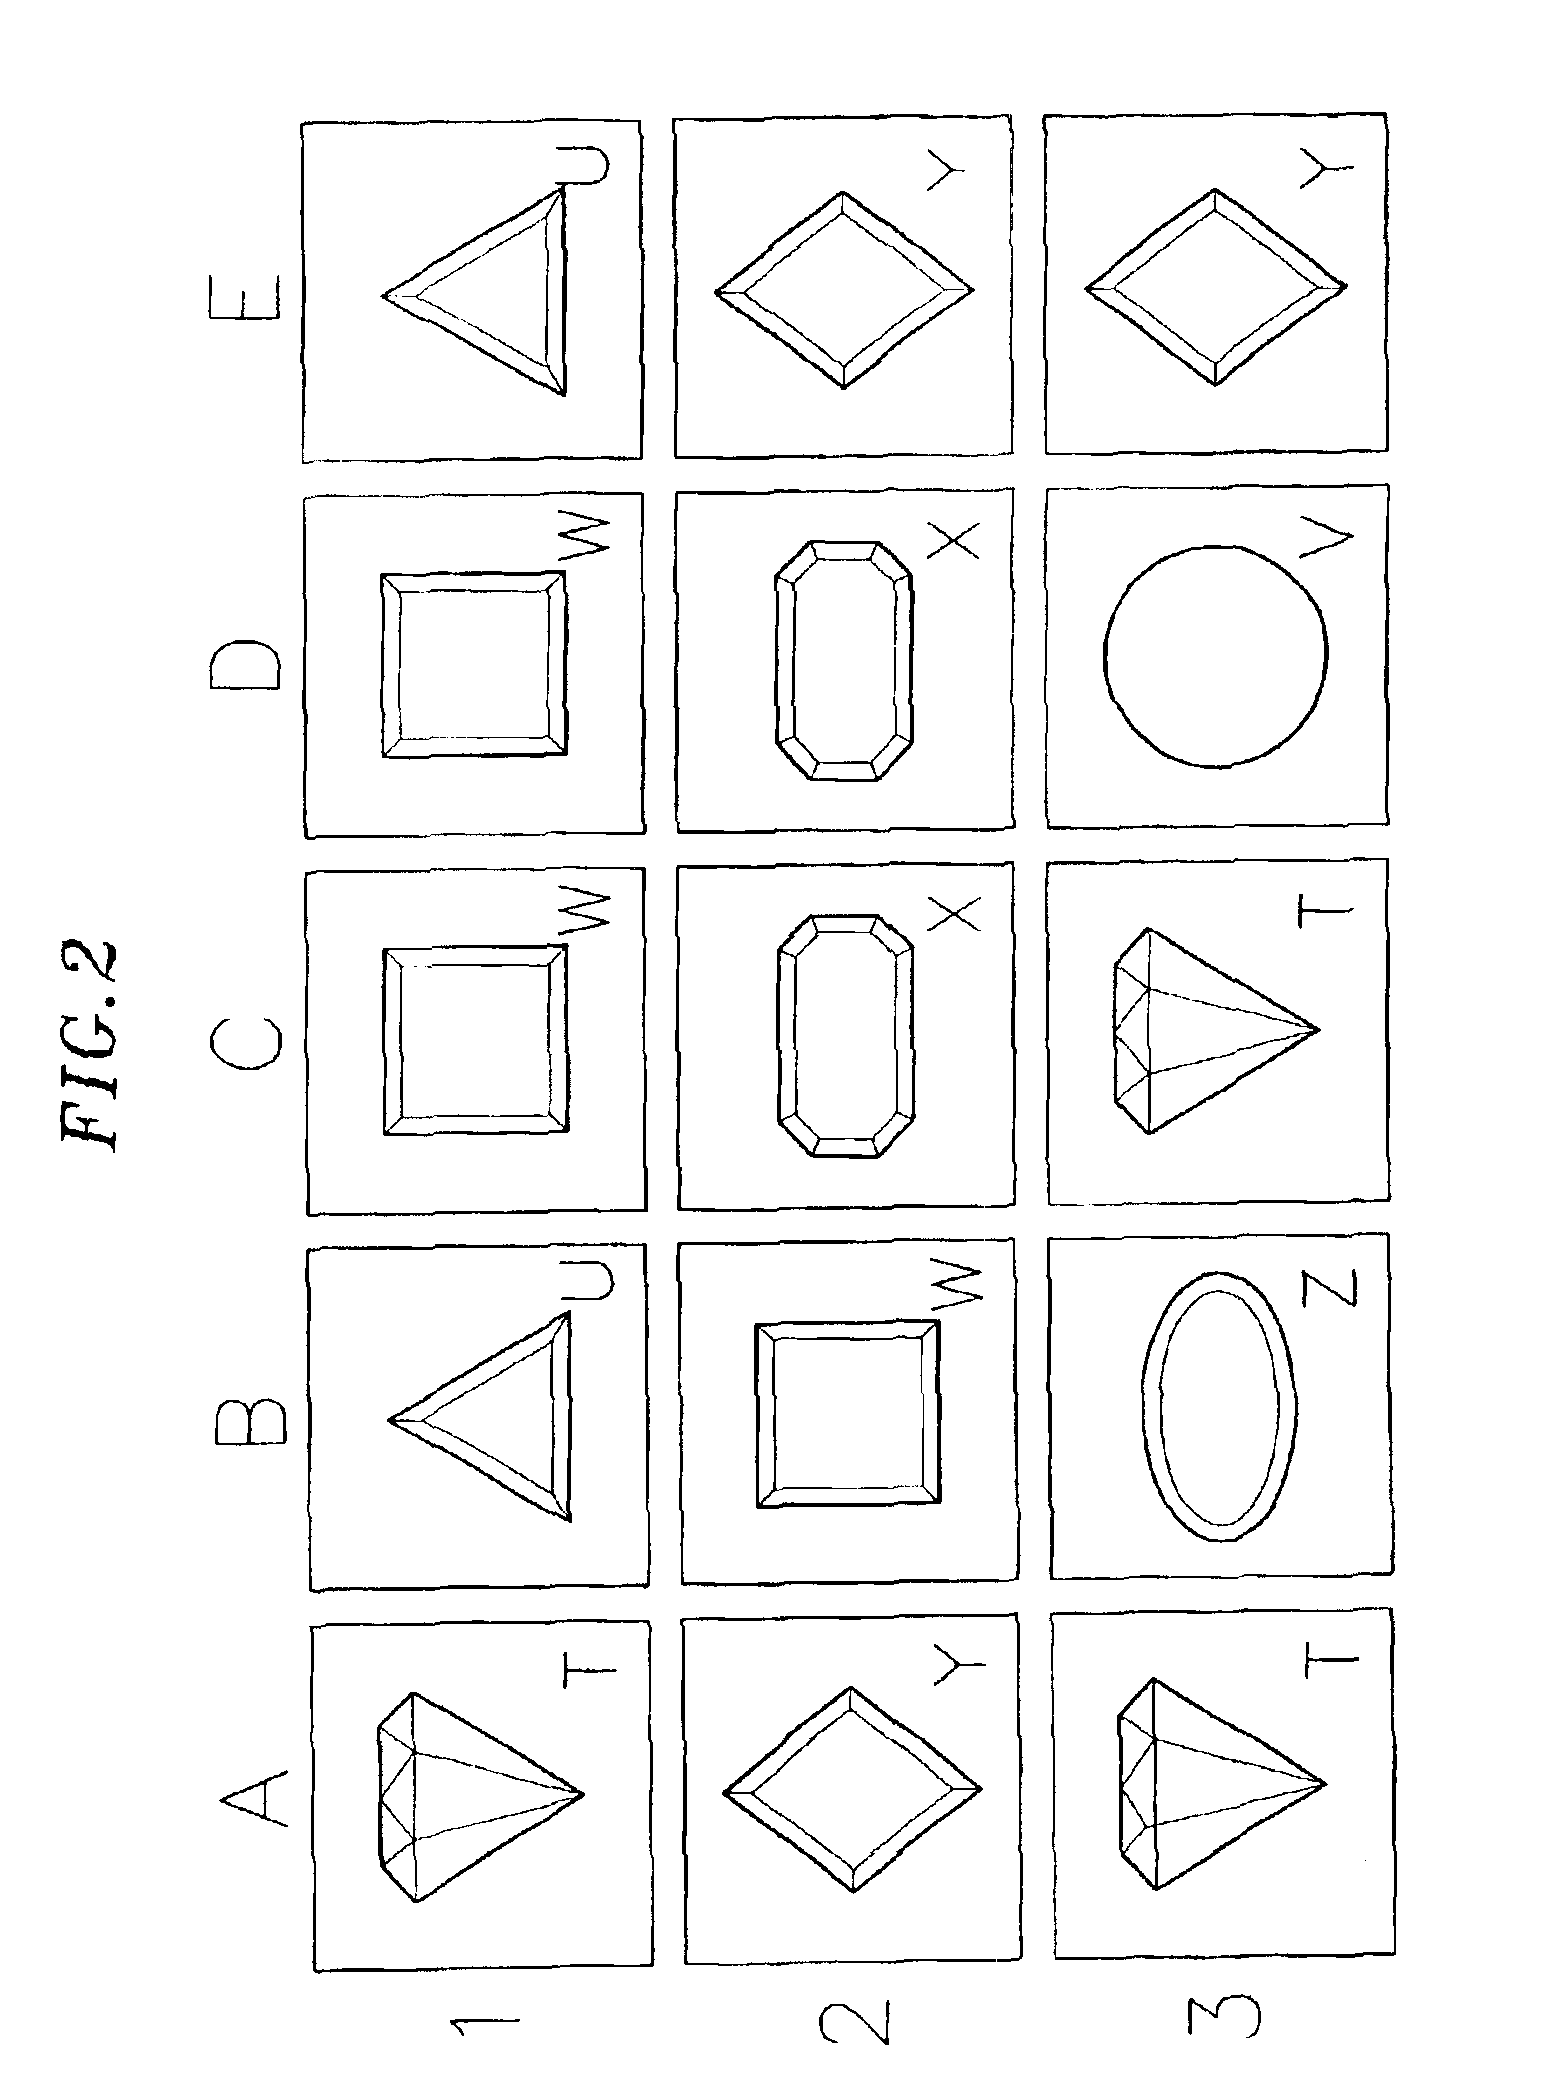 Electronic game and method for playing a game based upon removal and replacing symbols in the game matrix